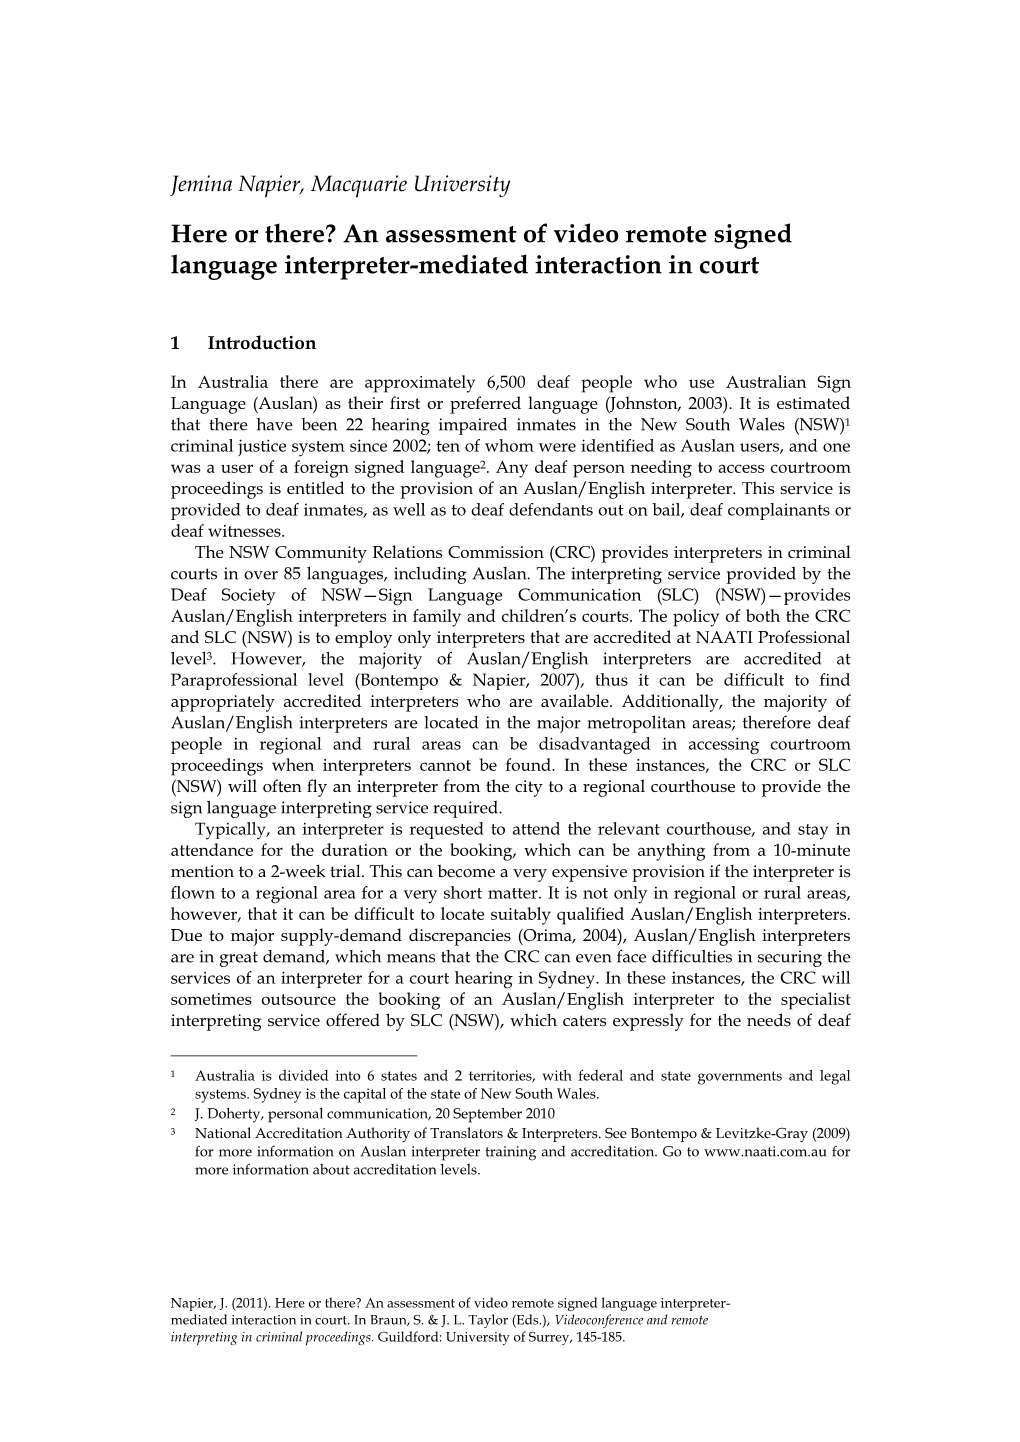 Here Or There? an Assessment of Video Remote Signed Language Interpreter-Mediated Interaction in Court